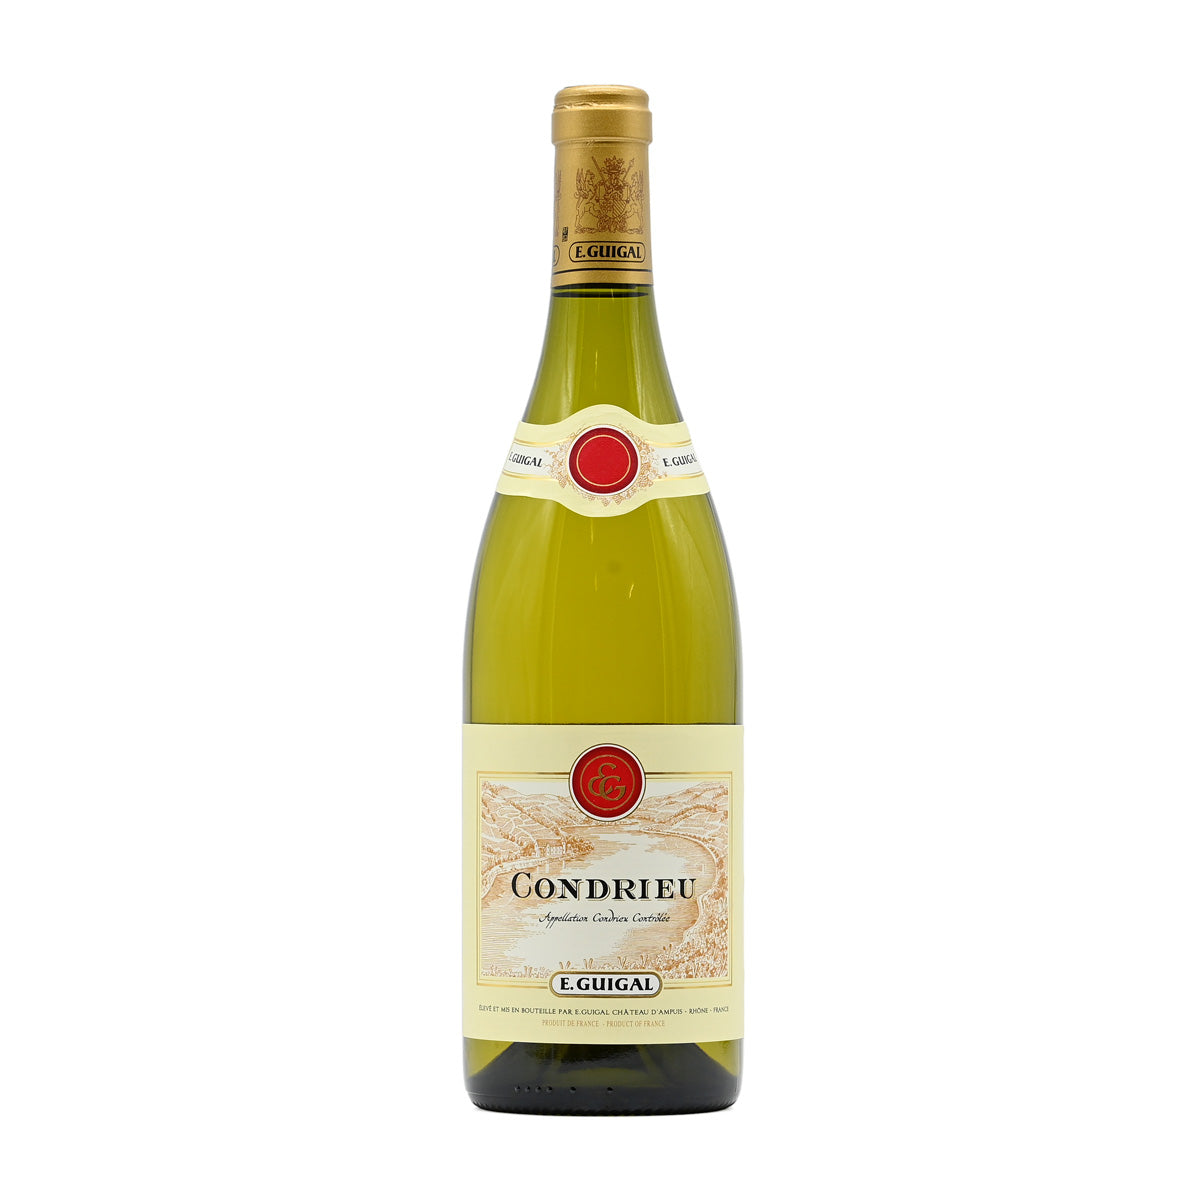 E. Guigal Condrieu 2019, 750ml French white wine, made from Viognier, from Northern Rhone, France – GDV Fine Wines, Hong Kong